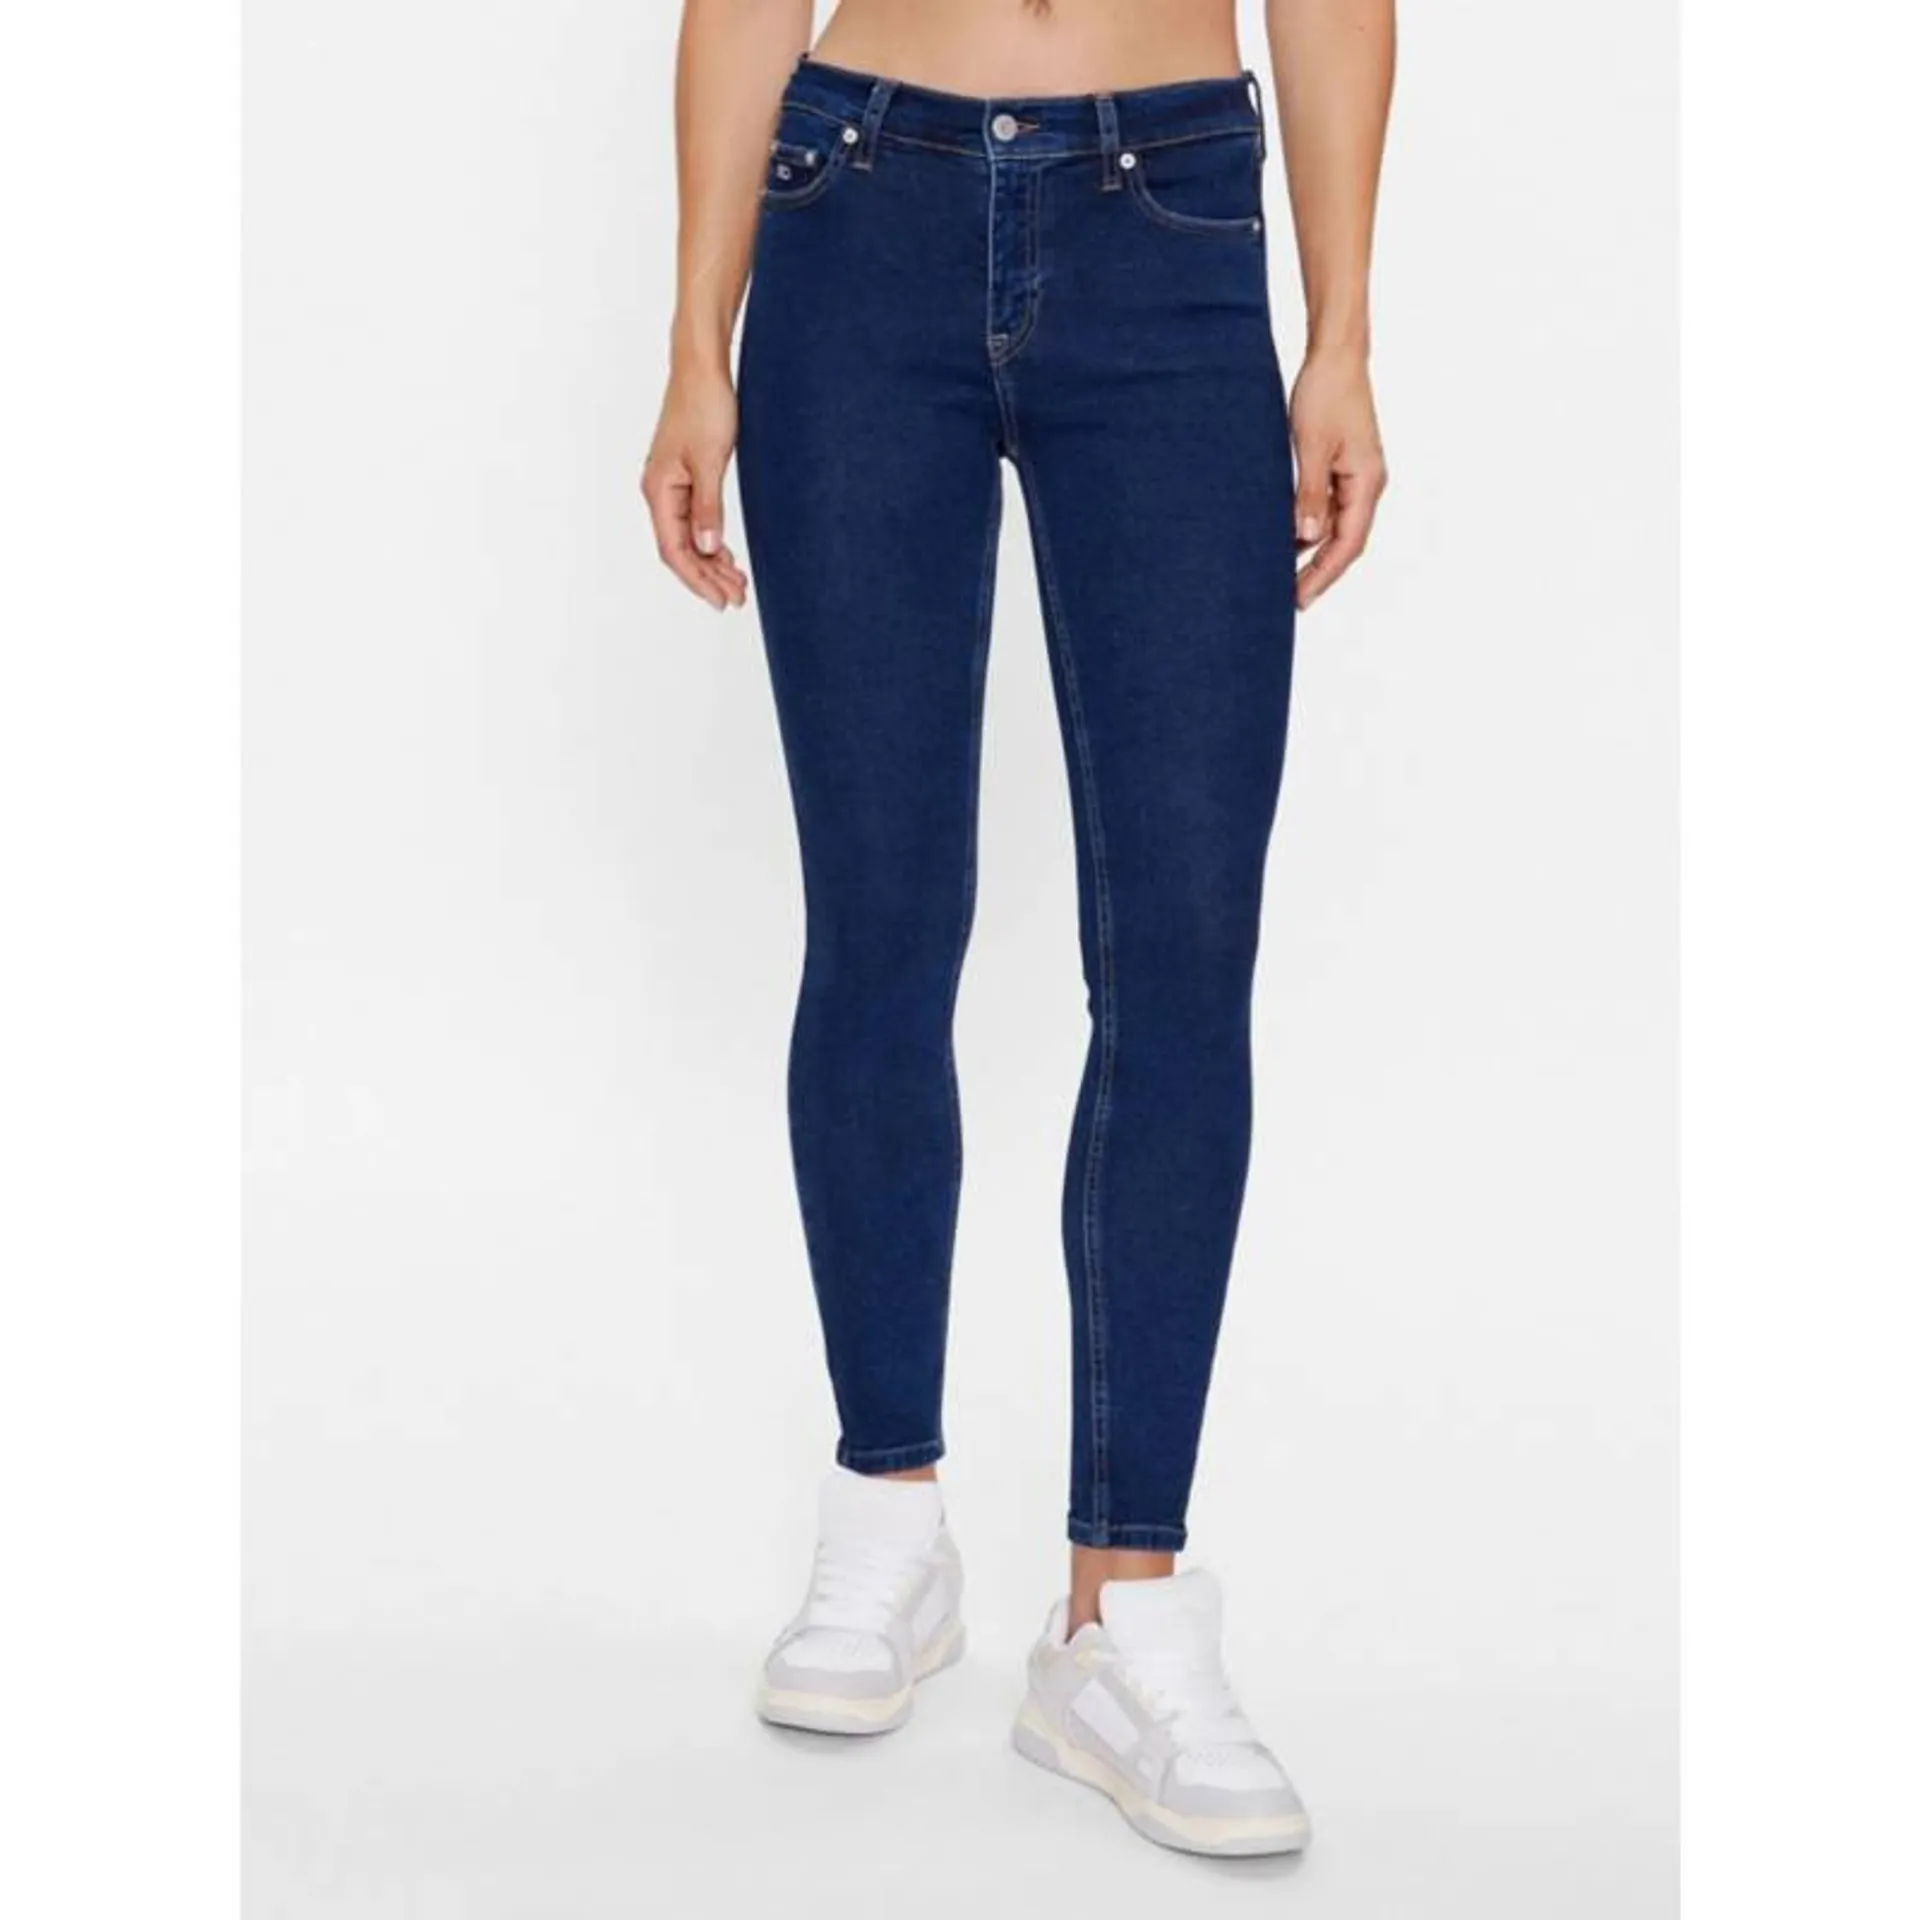 Jeans Nora Corte Skinny Talle Medio Azul Tommy Jeans